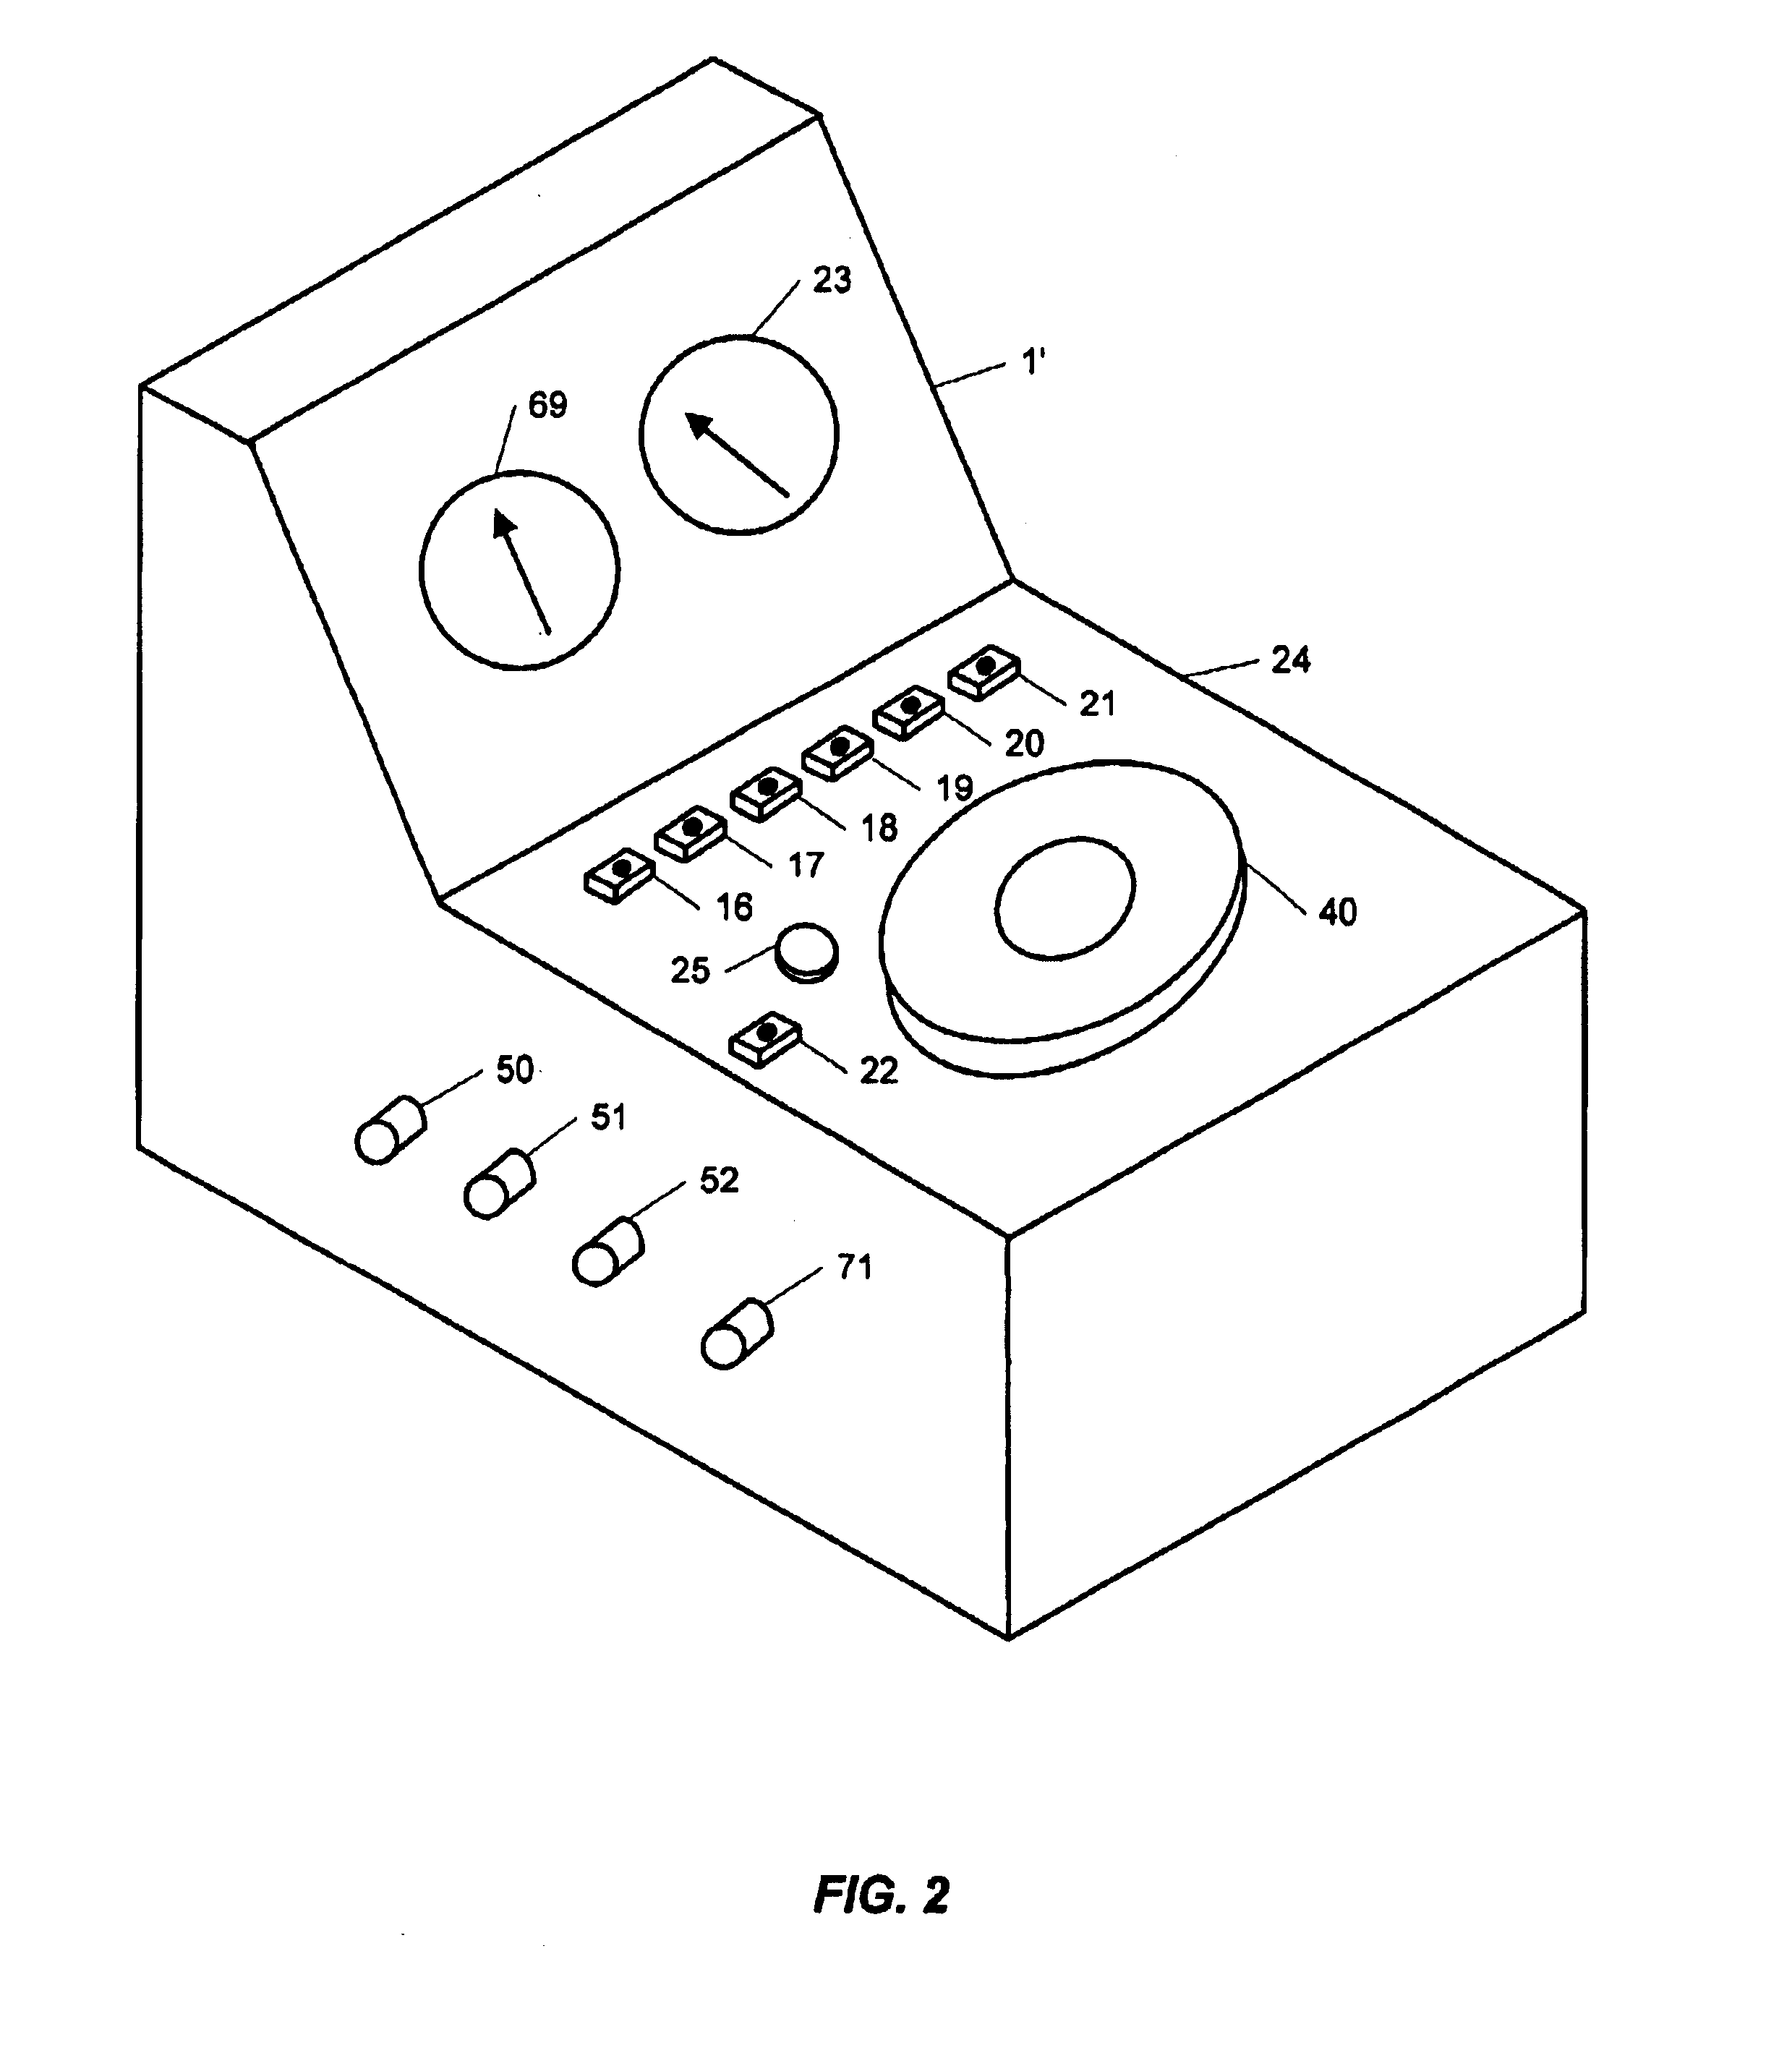 Supercritical point drying apparatus for semiconductor device manufacturing and bio-medical sample processing